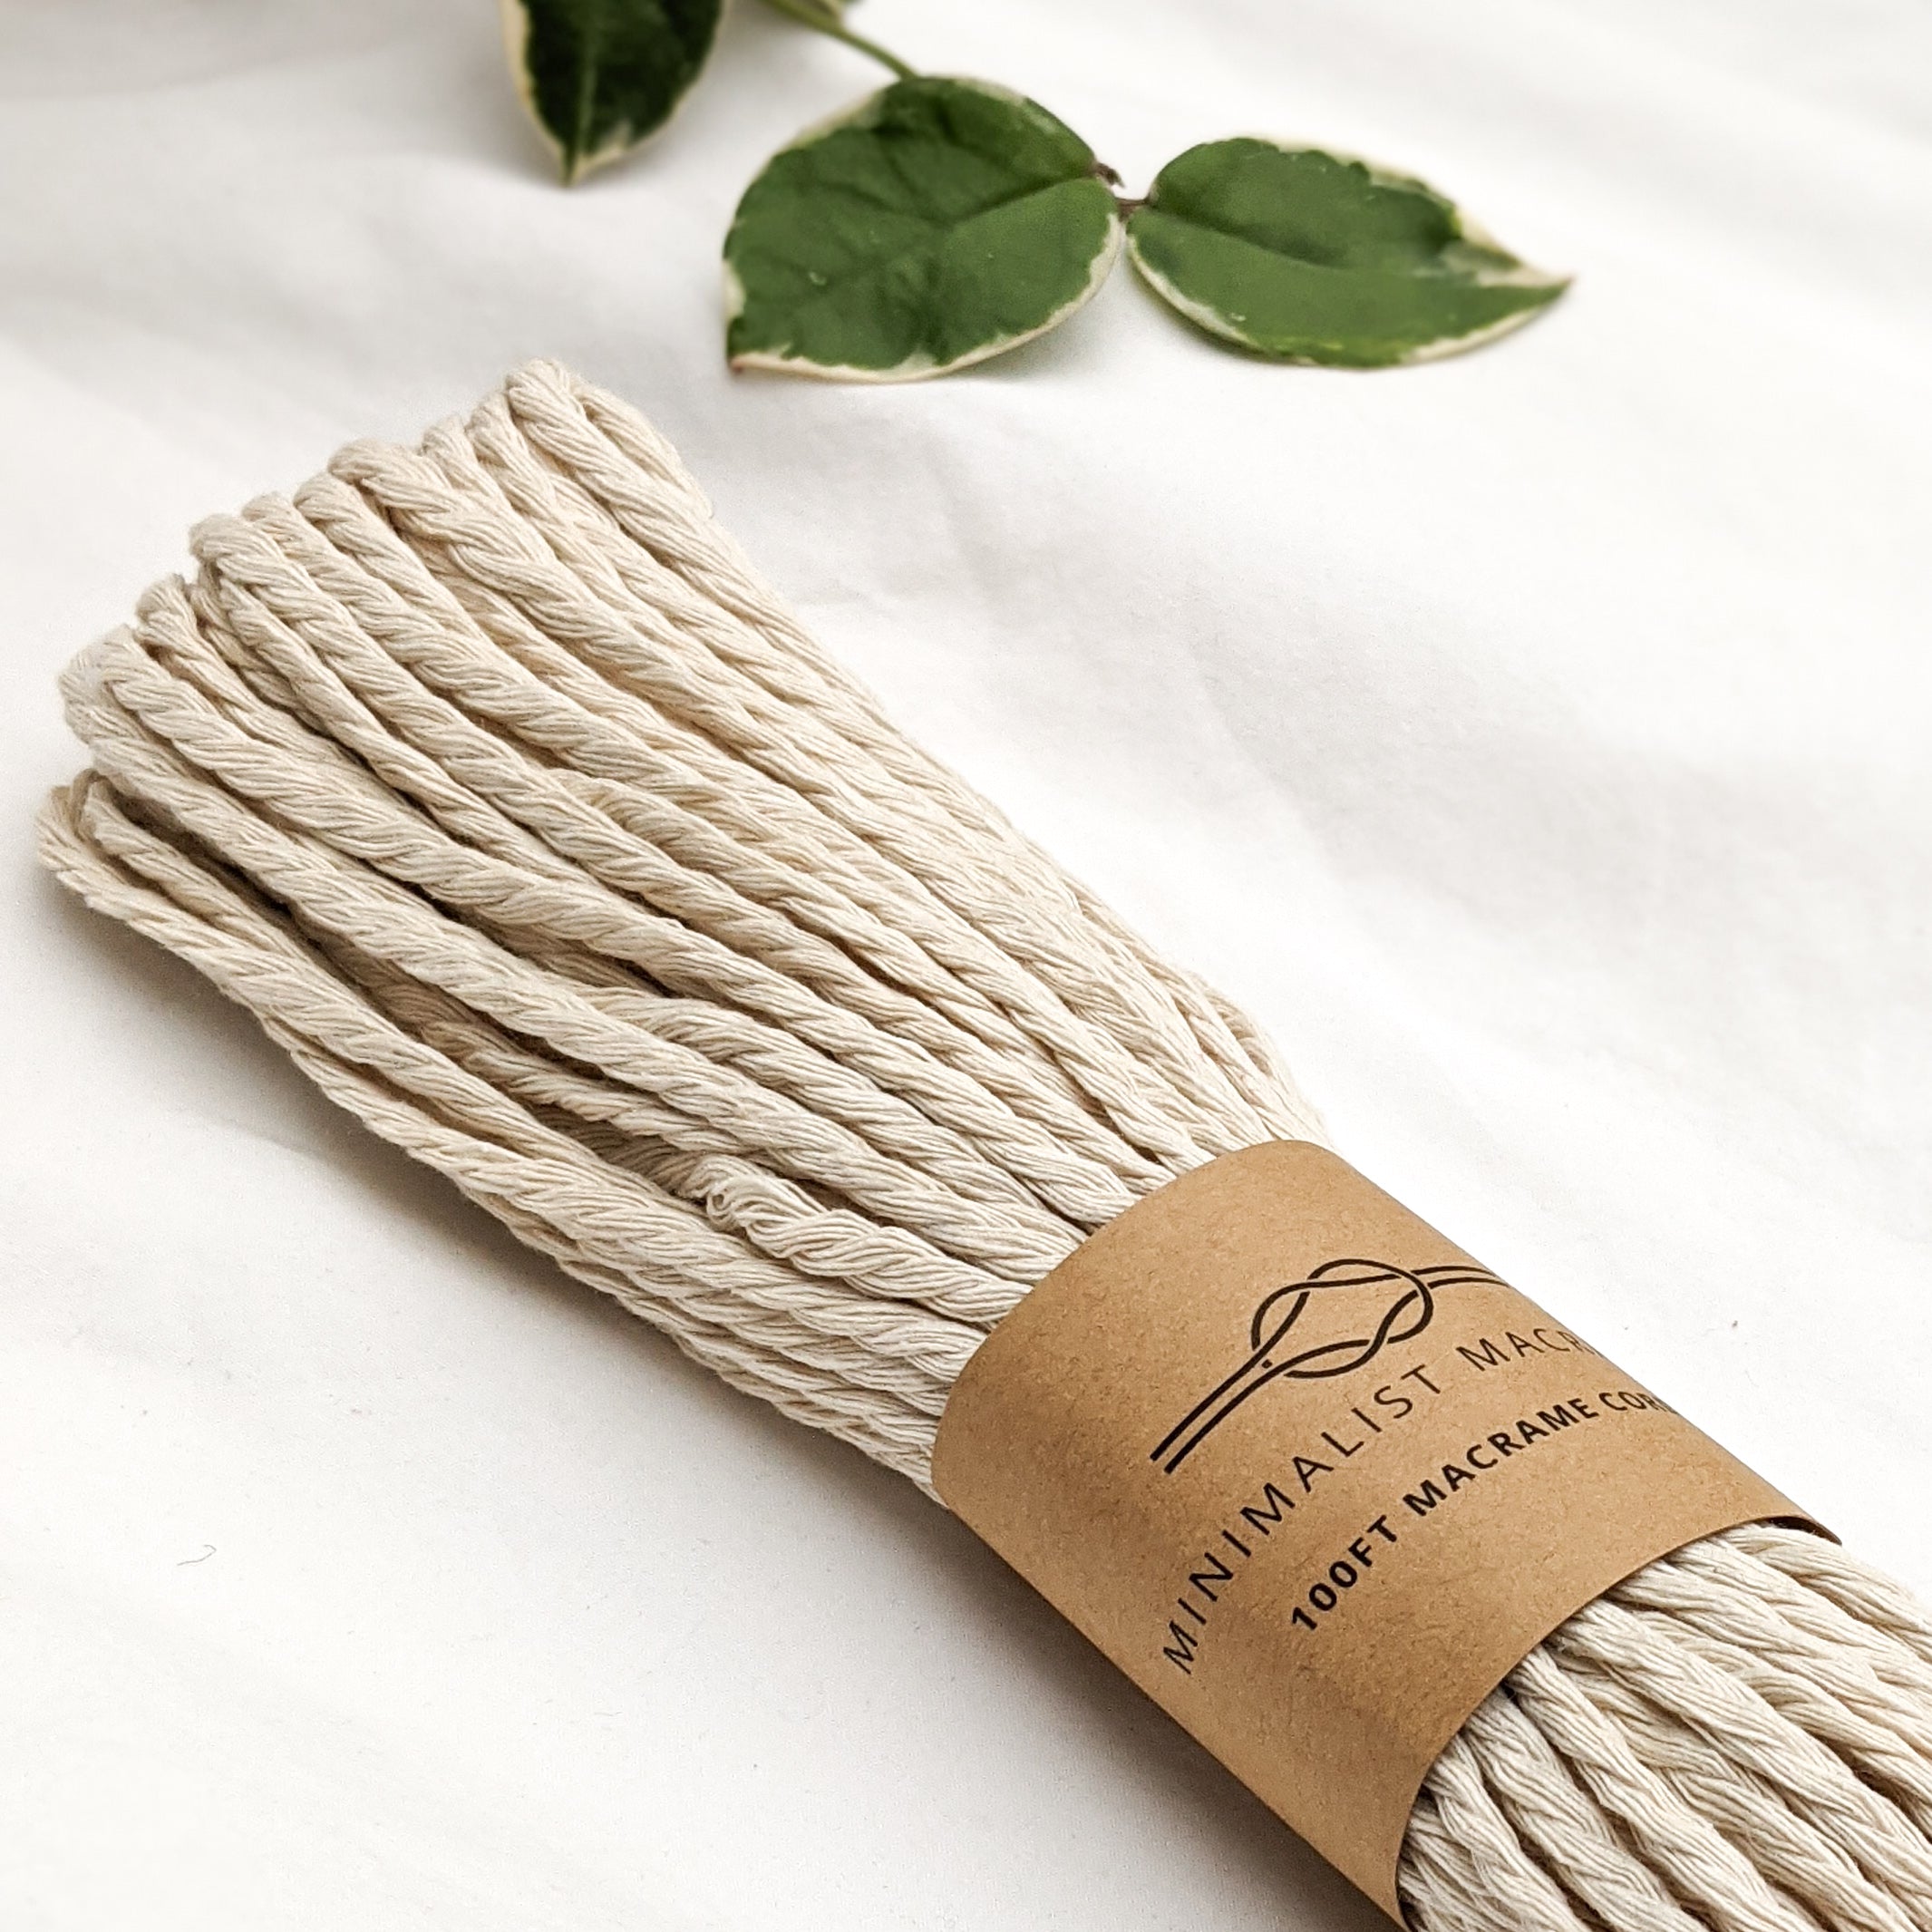 Natural // 100 ft of 3mm Twisted Cotton Cord